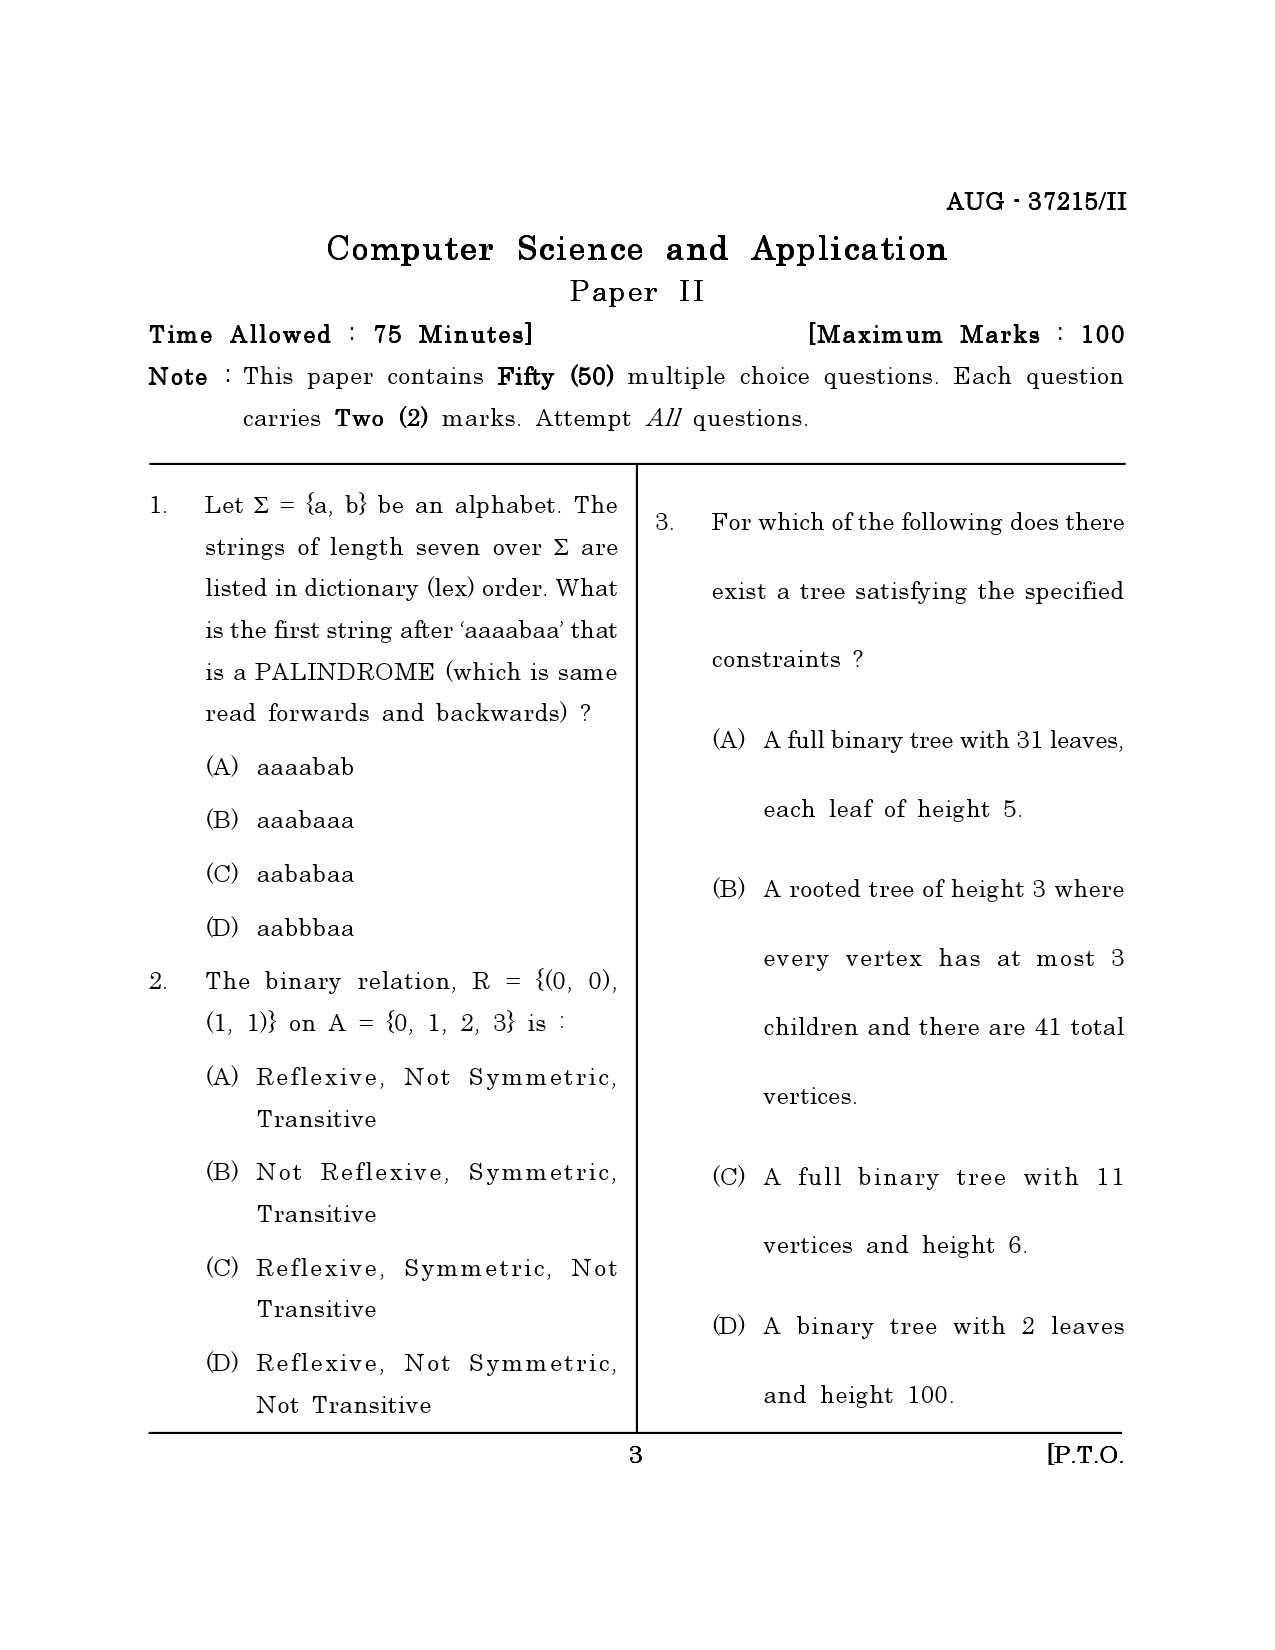 Maharashtra SET Computer Science and Application Question Paper II August 2015 2